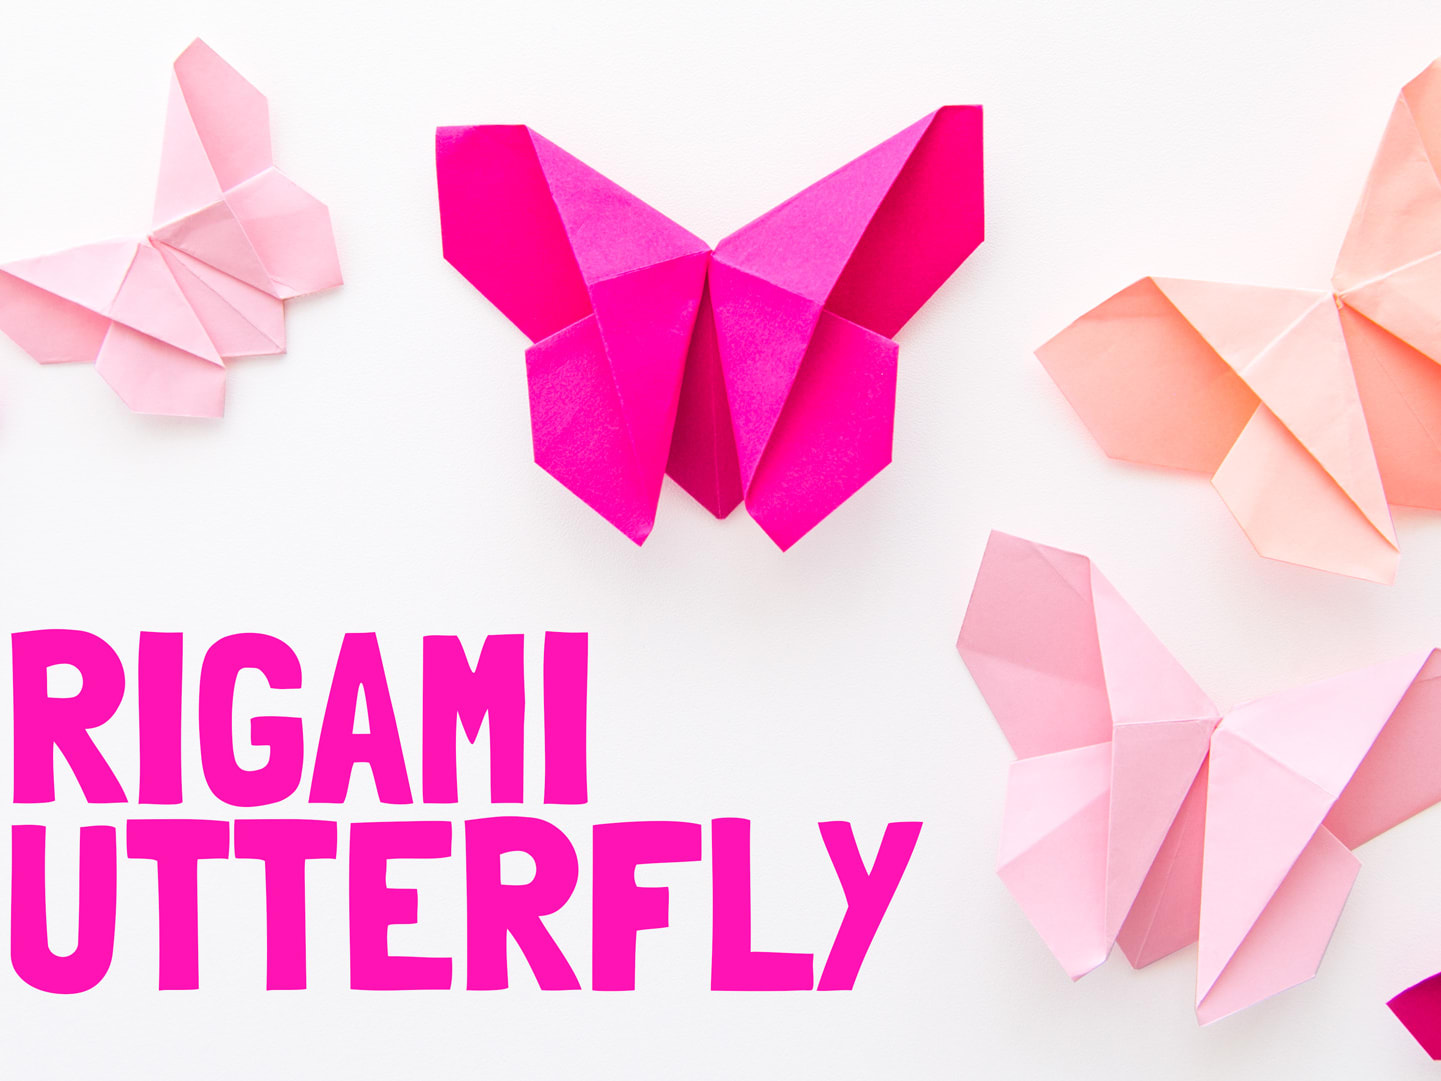 How to Make an Easy Origami Butterfly